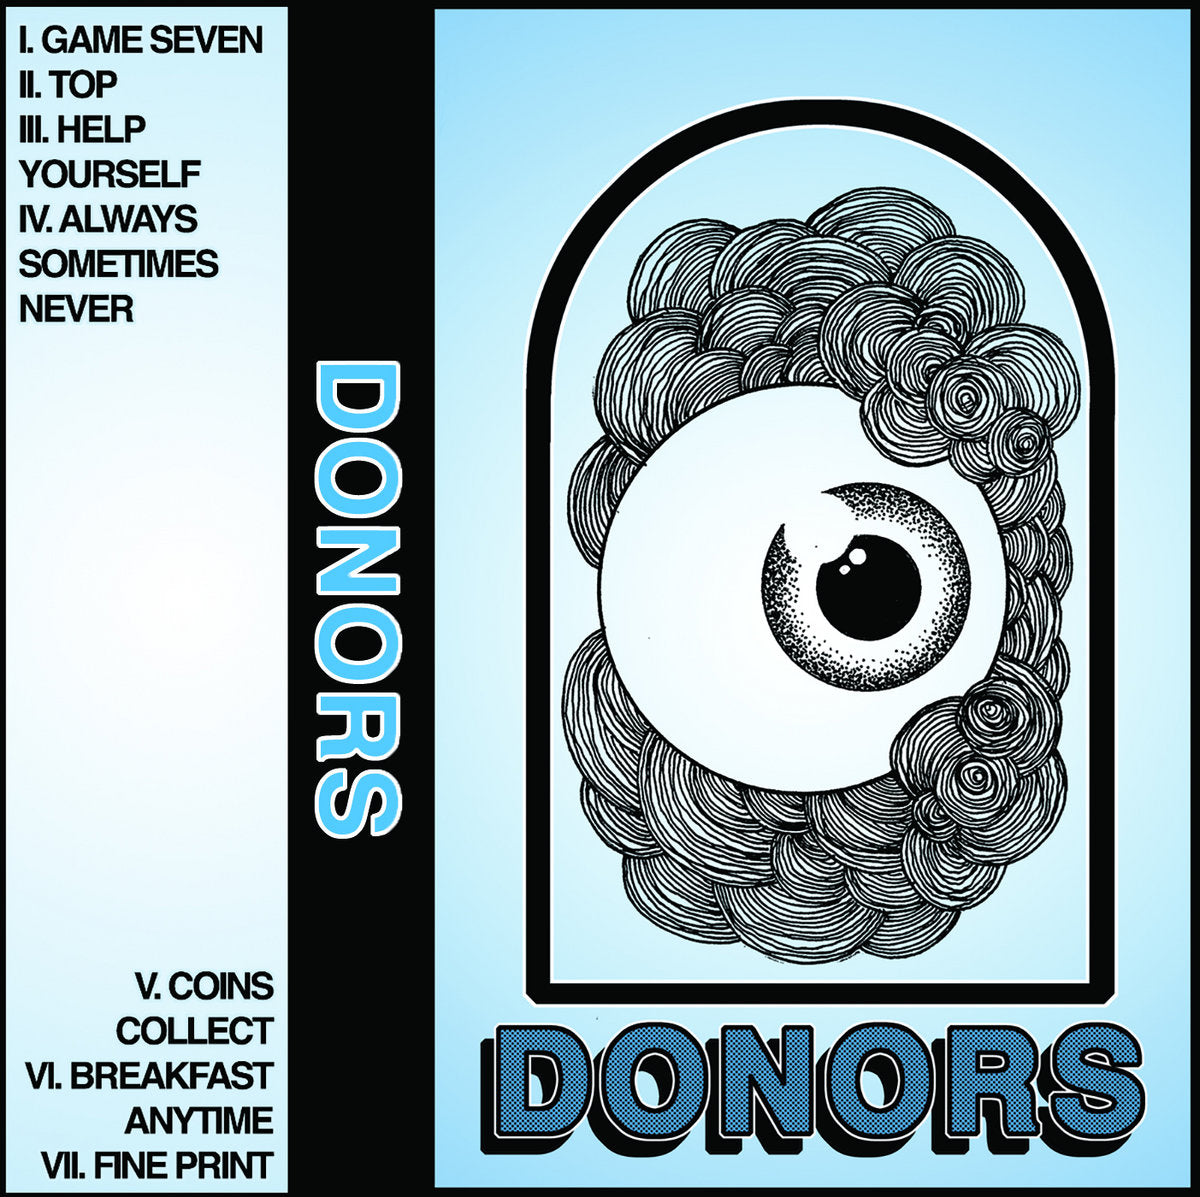 DONORS - "DONORS" CS